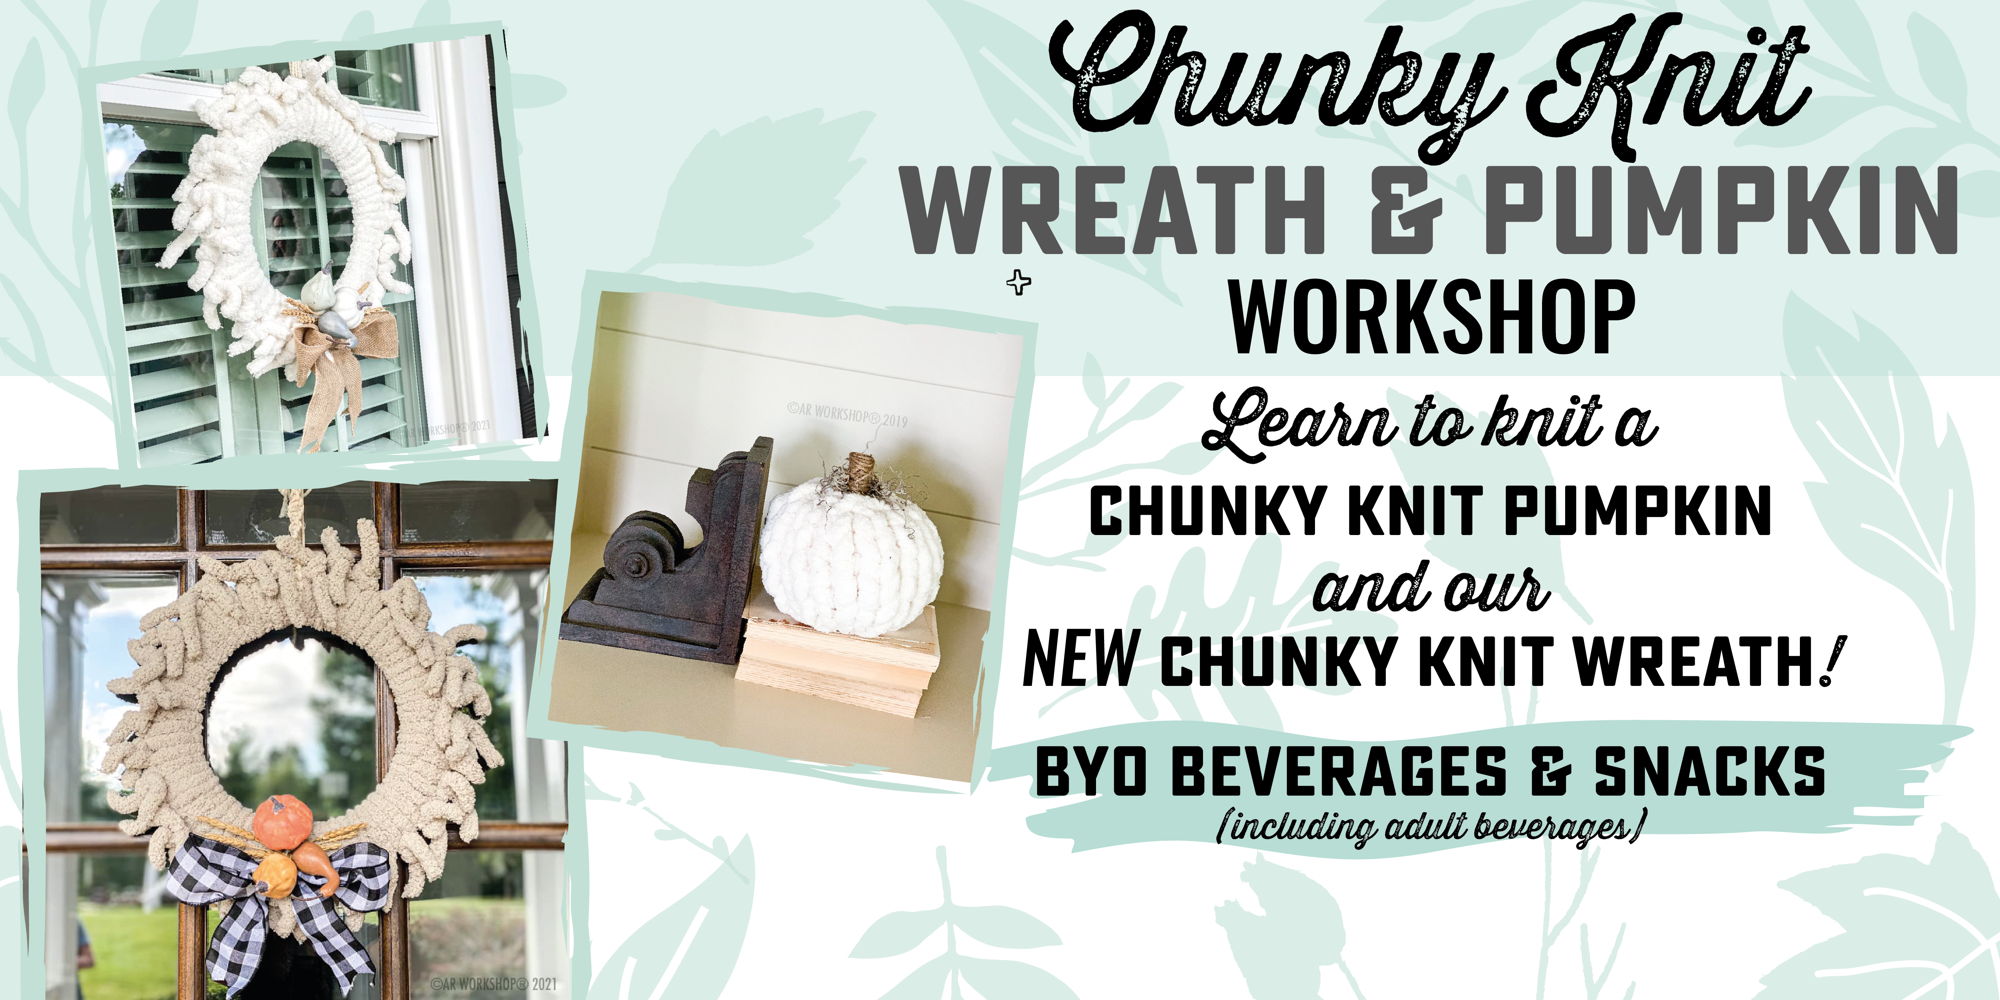 Chunky Knit Wreath and Pumpkin Workshop promotional image